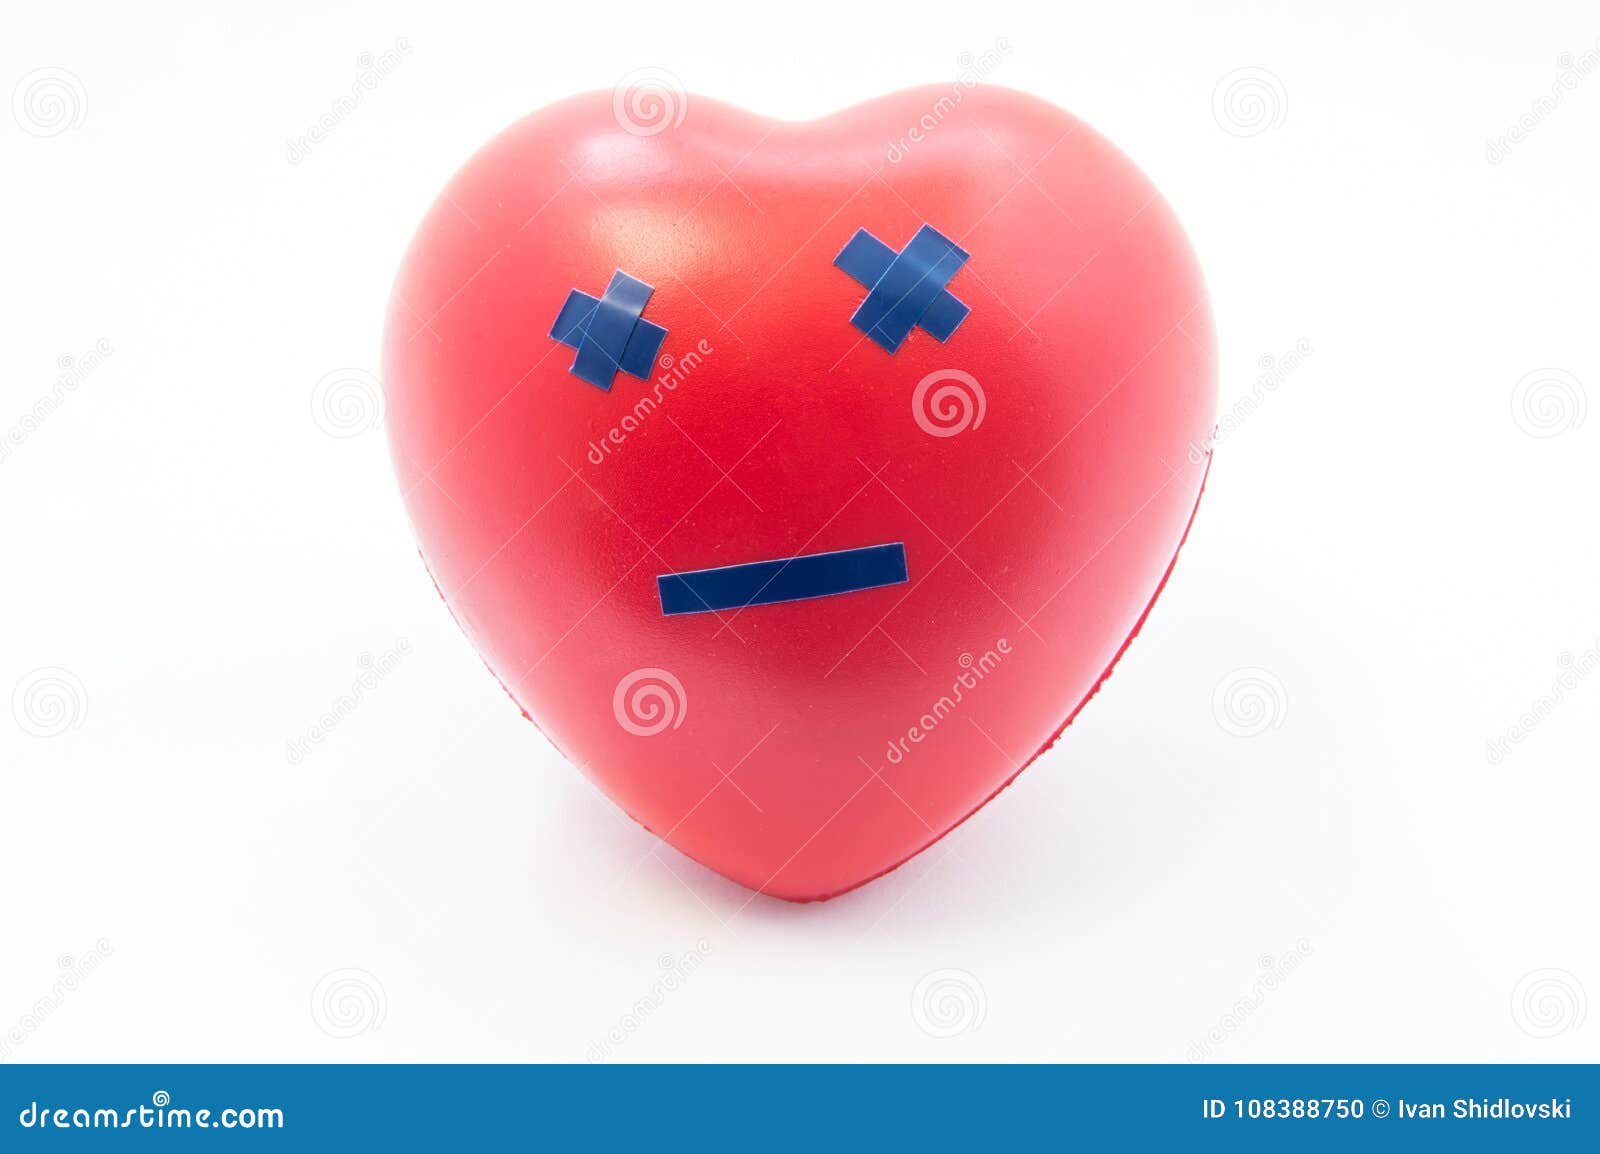 Heart Shape with Emotion Dead Smile. Concept Photo Visualizing ...